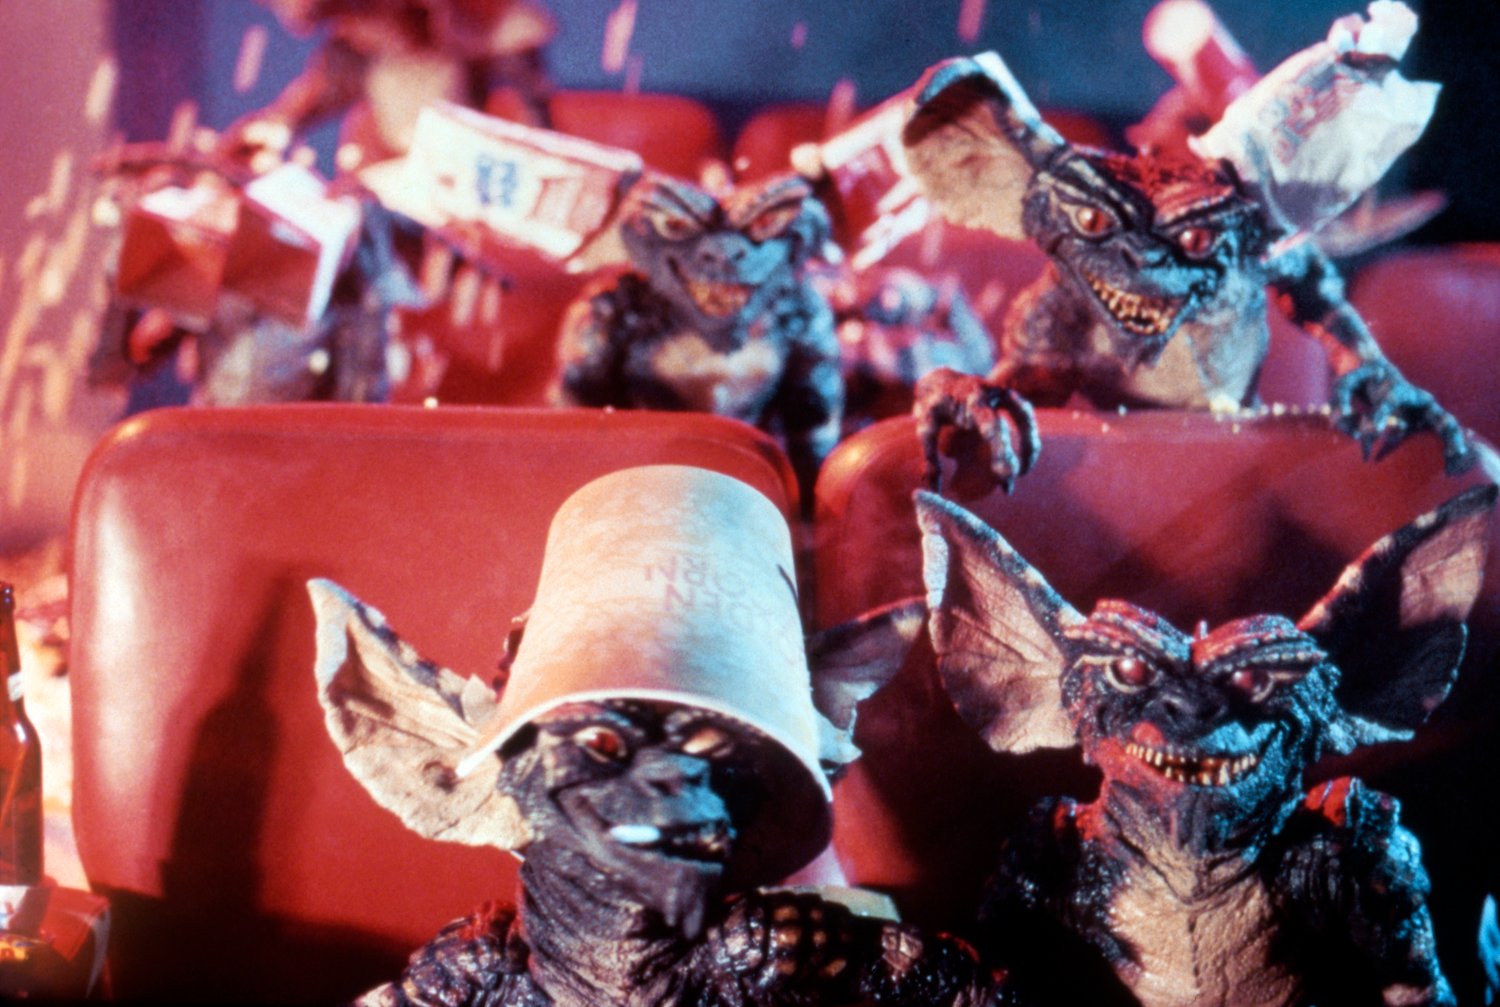 A group of Gremlins sitting in a theater, entirely too excited to watch 'Snow White' in this production still from the movie, 'Gremlins.'